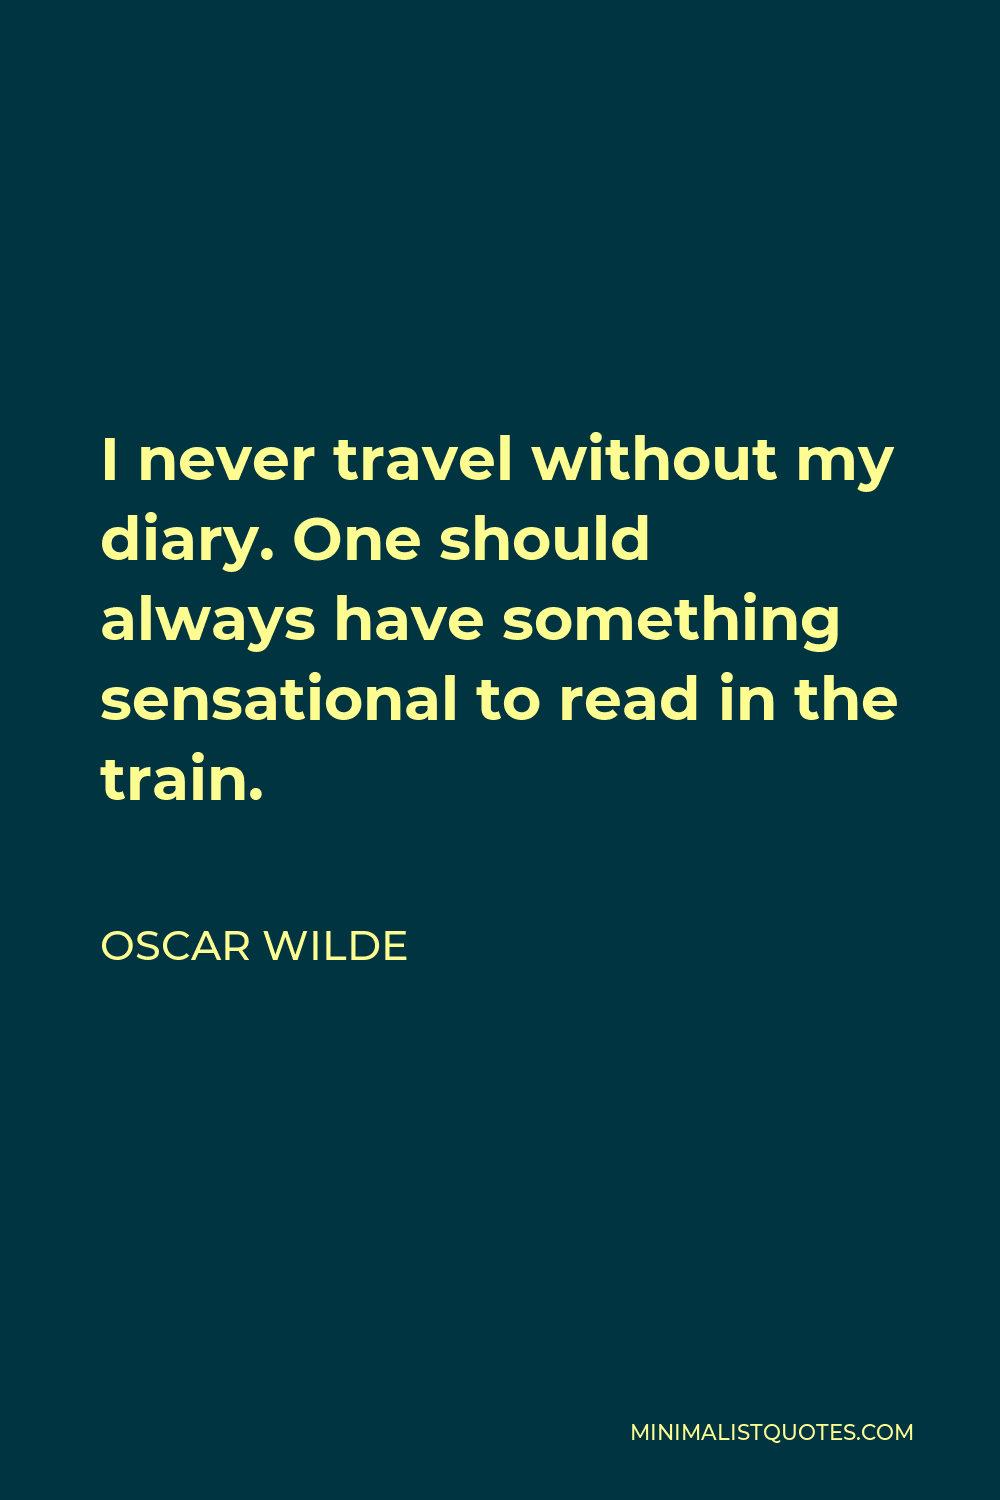 i never travel without my diary oscar wilde